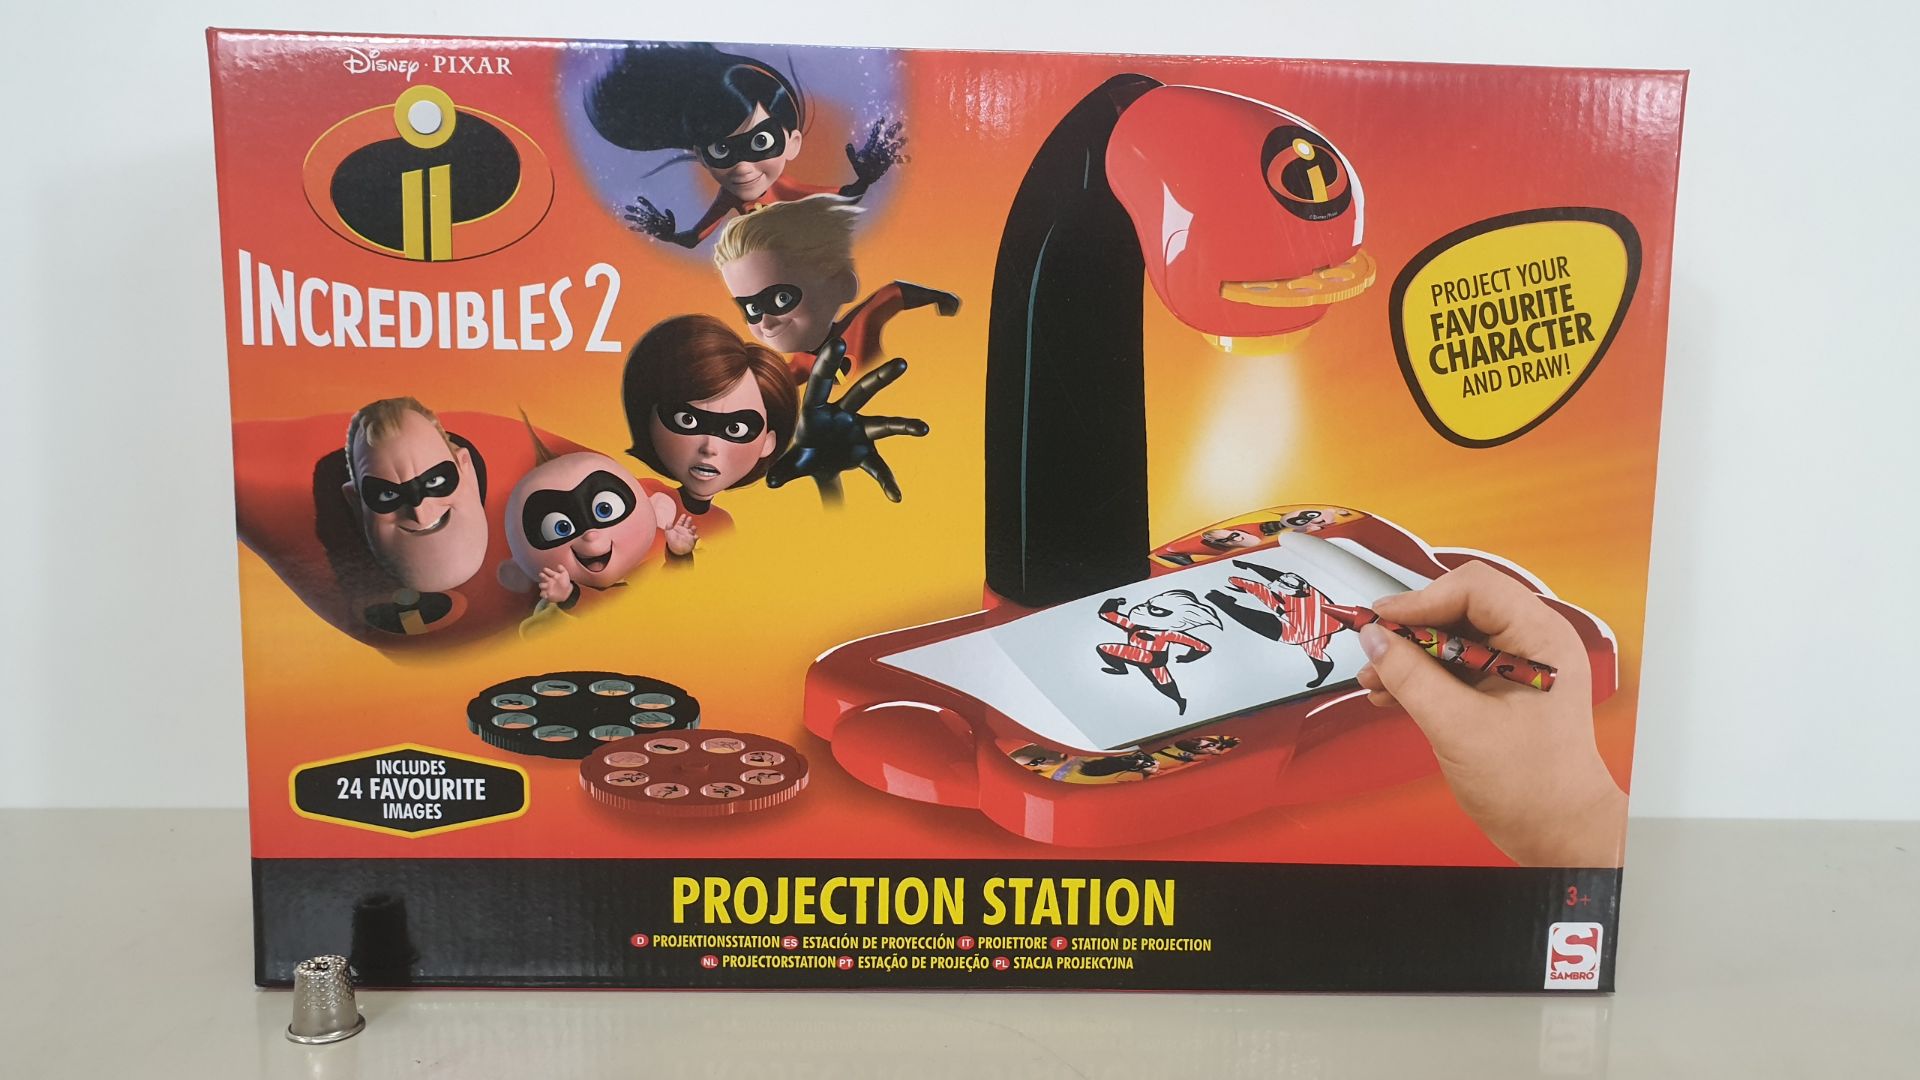 36 X DISNEY PIXAR INCREDIBLES 2 PROJECTION STATION WITH 24 IMAGES - IN 6 BOXES